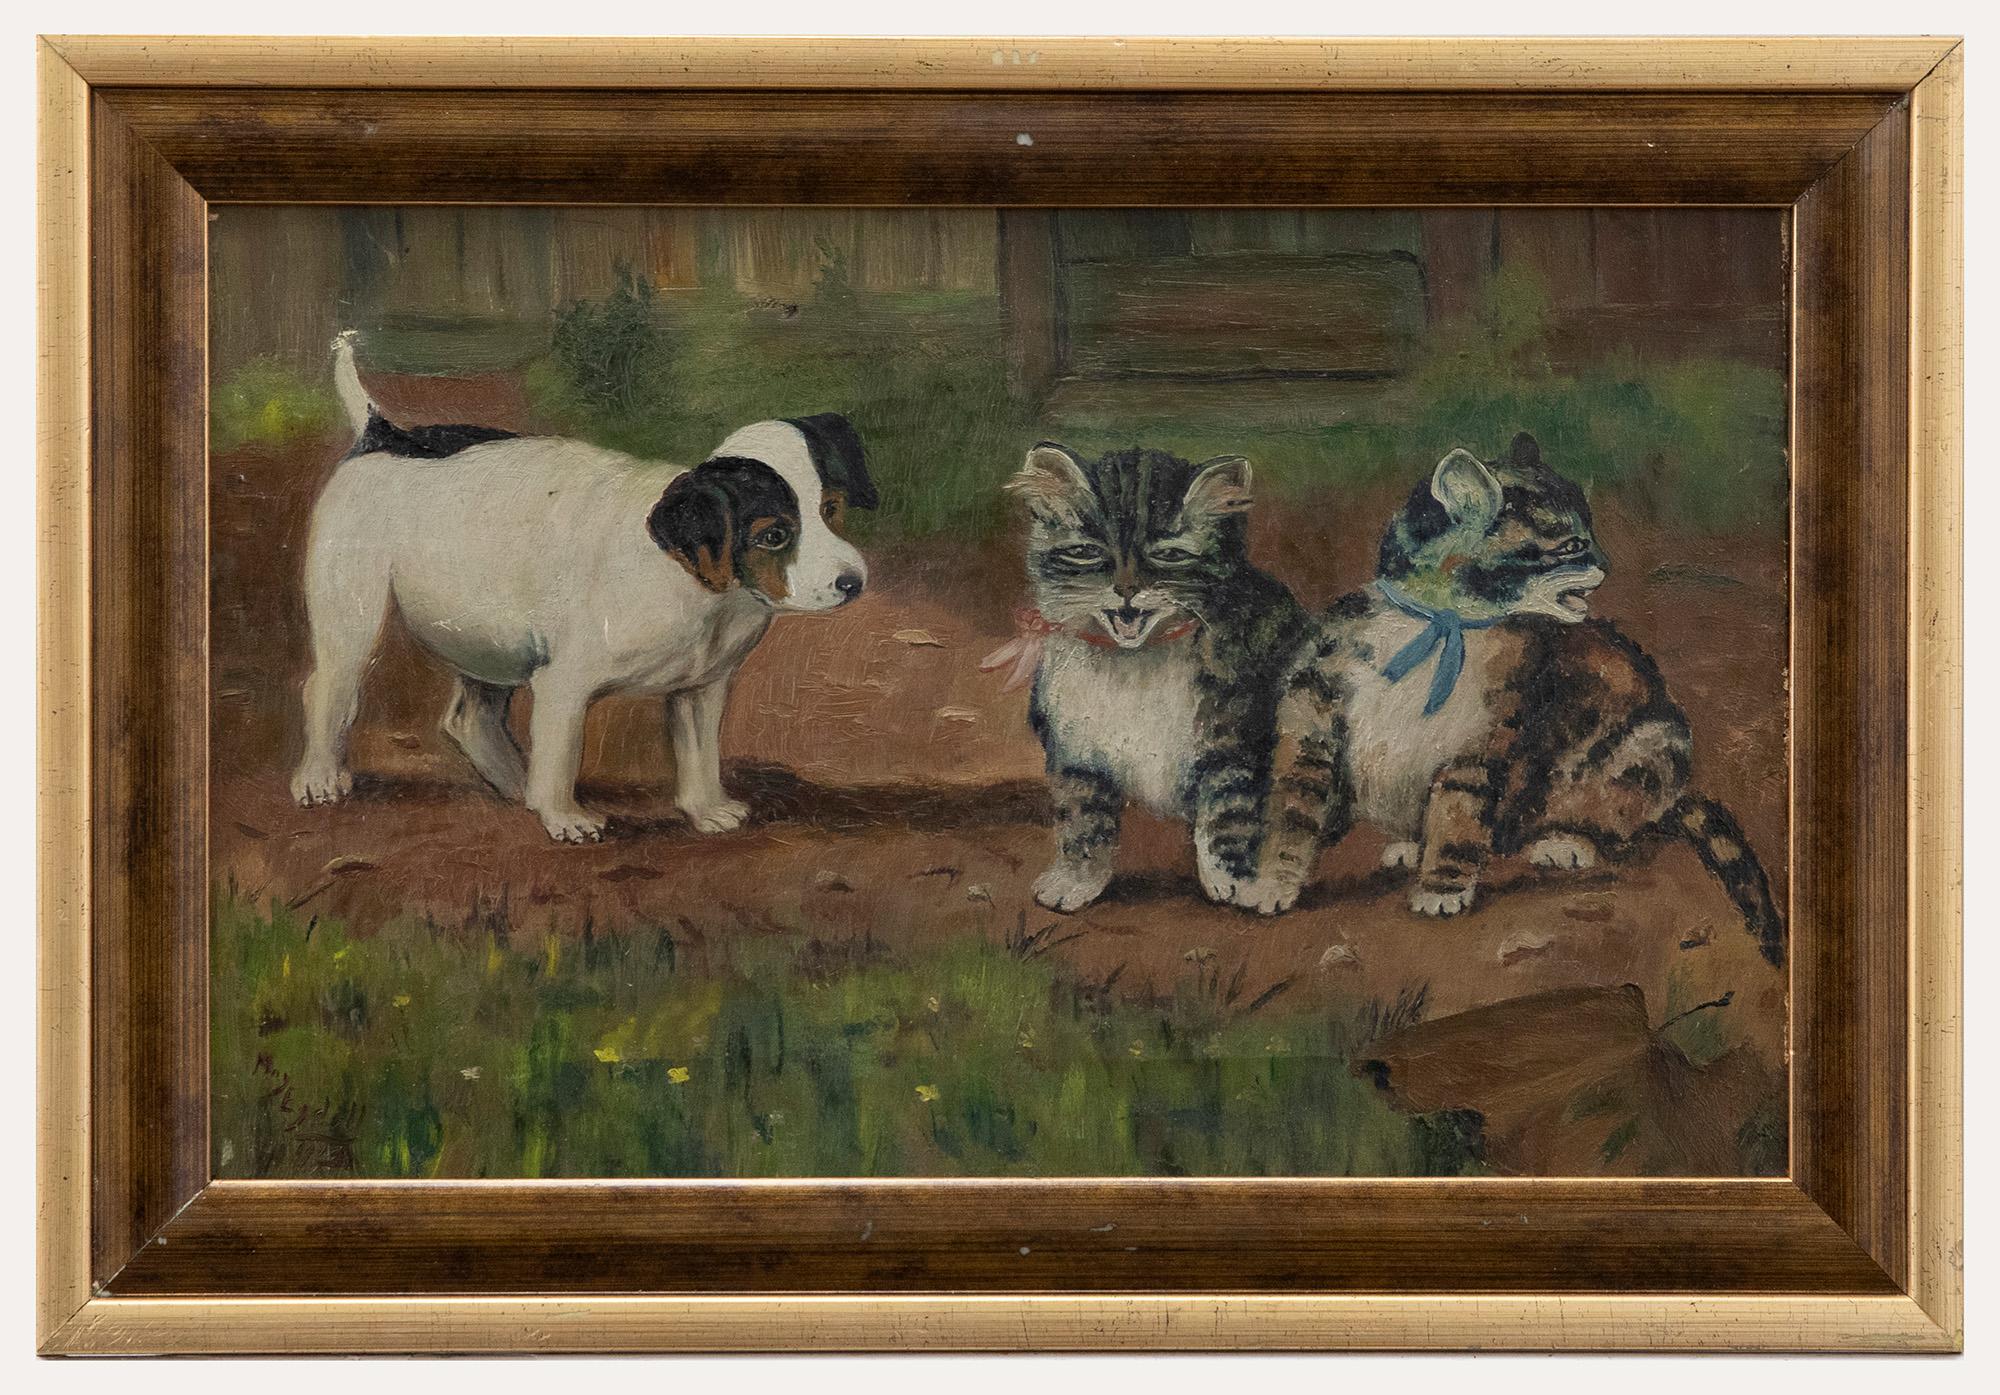 Unknown Animal Painting - May Egdell - Naive Early 20th Century Oil, Puppy and Two Kittens